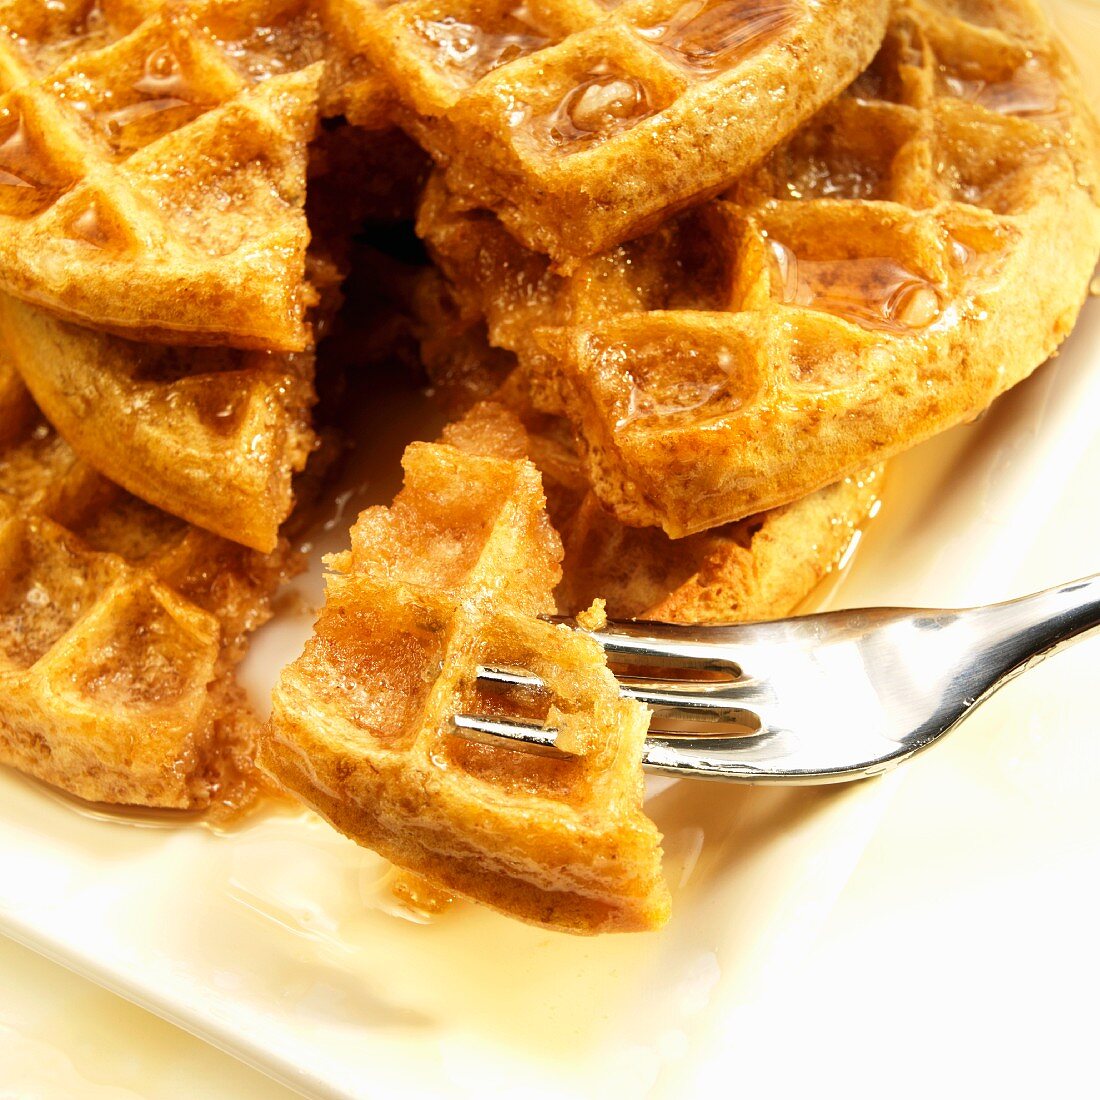 Stack of Five Grain Waffle with Organic Maple Syrup; Piece on a Fork